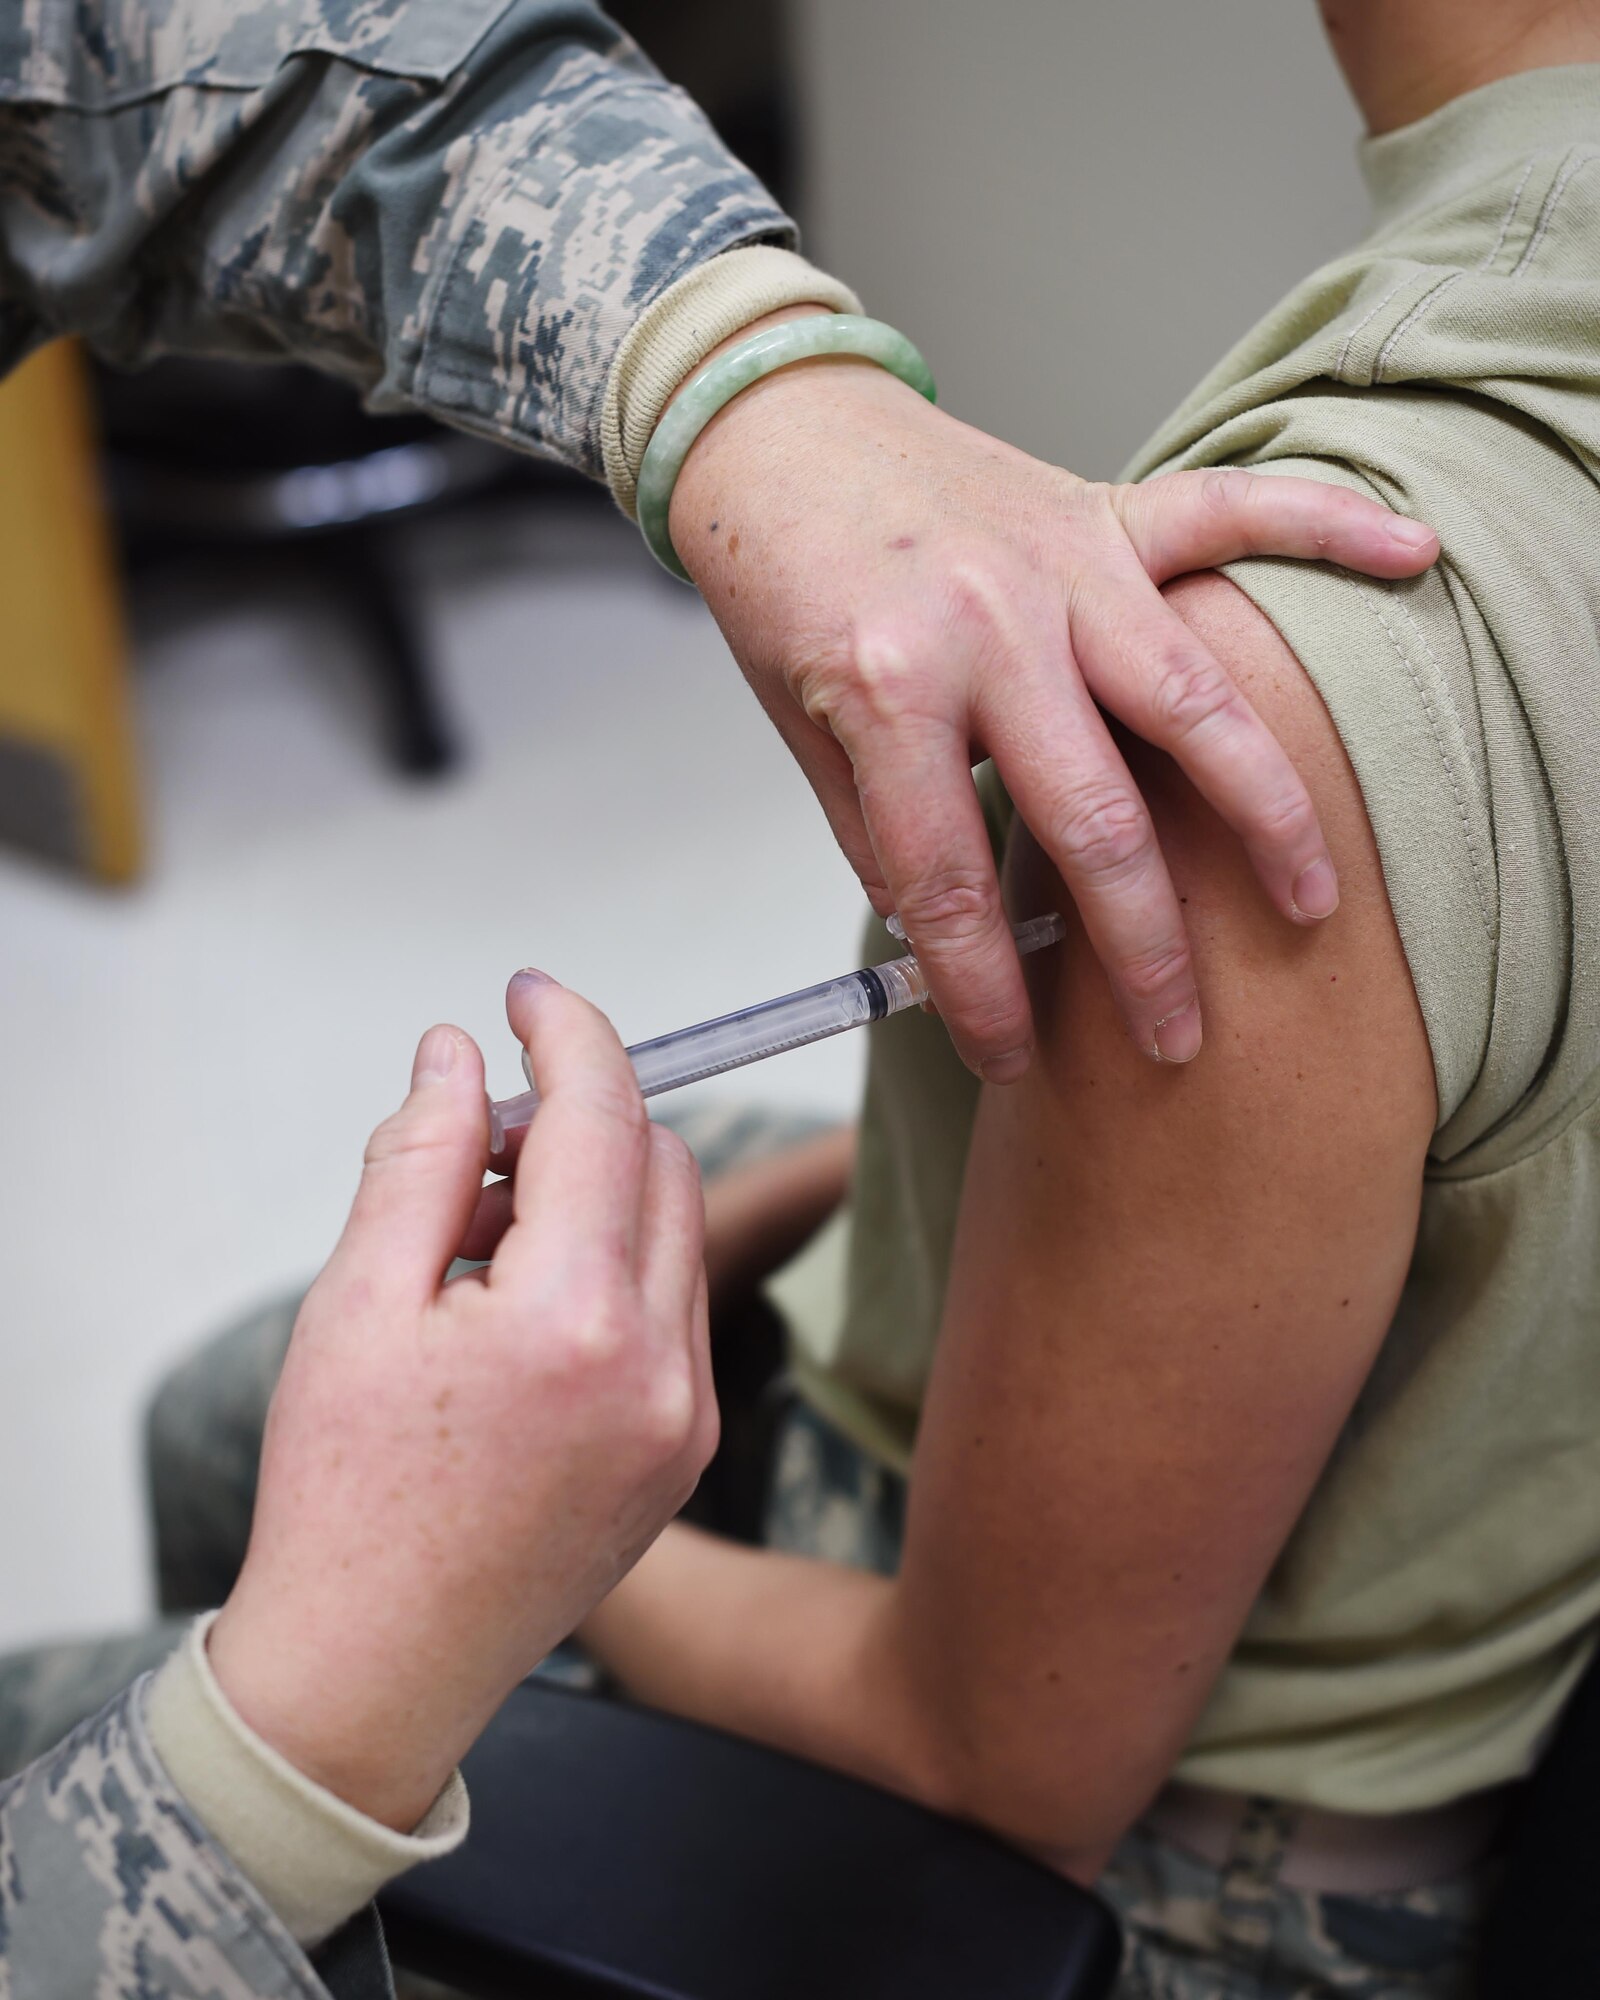 U.S. Air Force airmen from the 133rd Airlift Wing process through the 133rd Medical Group’s clinic in St. Paul, Minn., Jan. 21, 2017. The airmen are preparing to deploy and are receiving the necessary immunizations, updating any dental or optical requirements, and visiting with base doctors as needed. 
(U.S. Air National Guard photo by Tech. Sgt. Austen R. Adriaens/ Released)